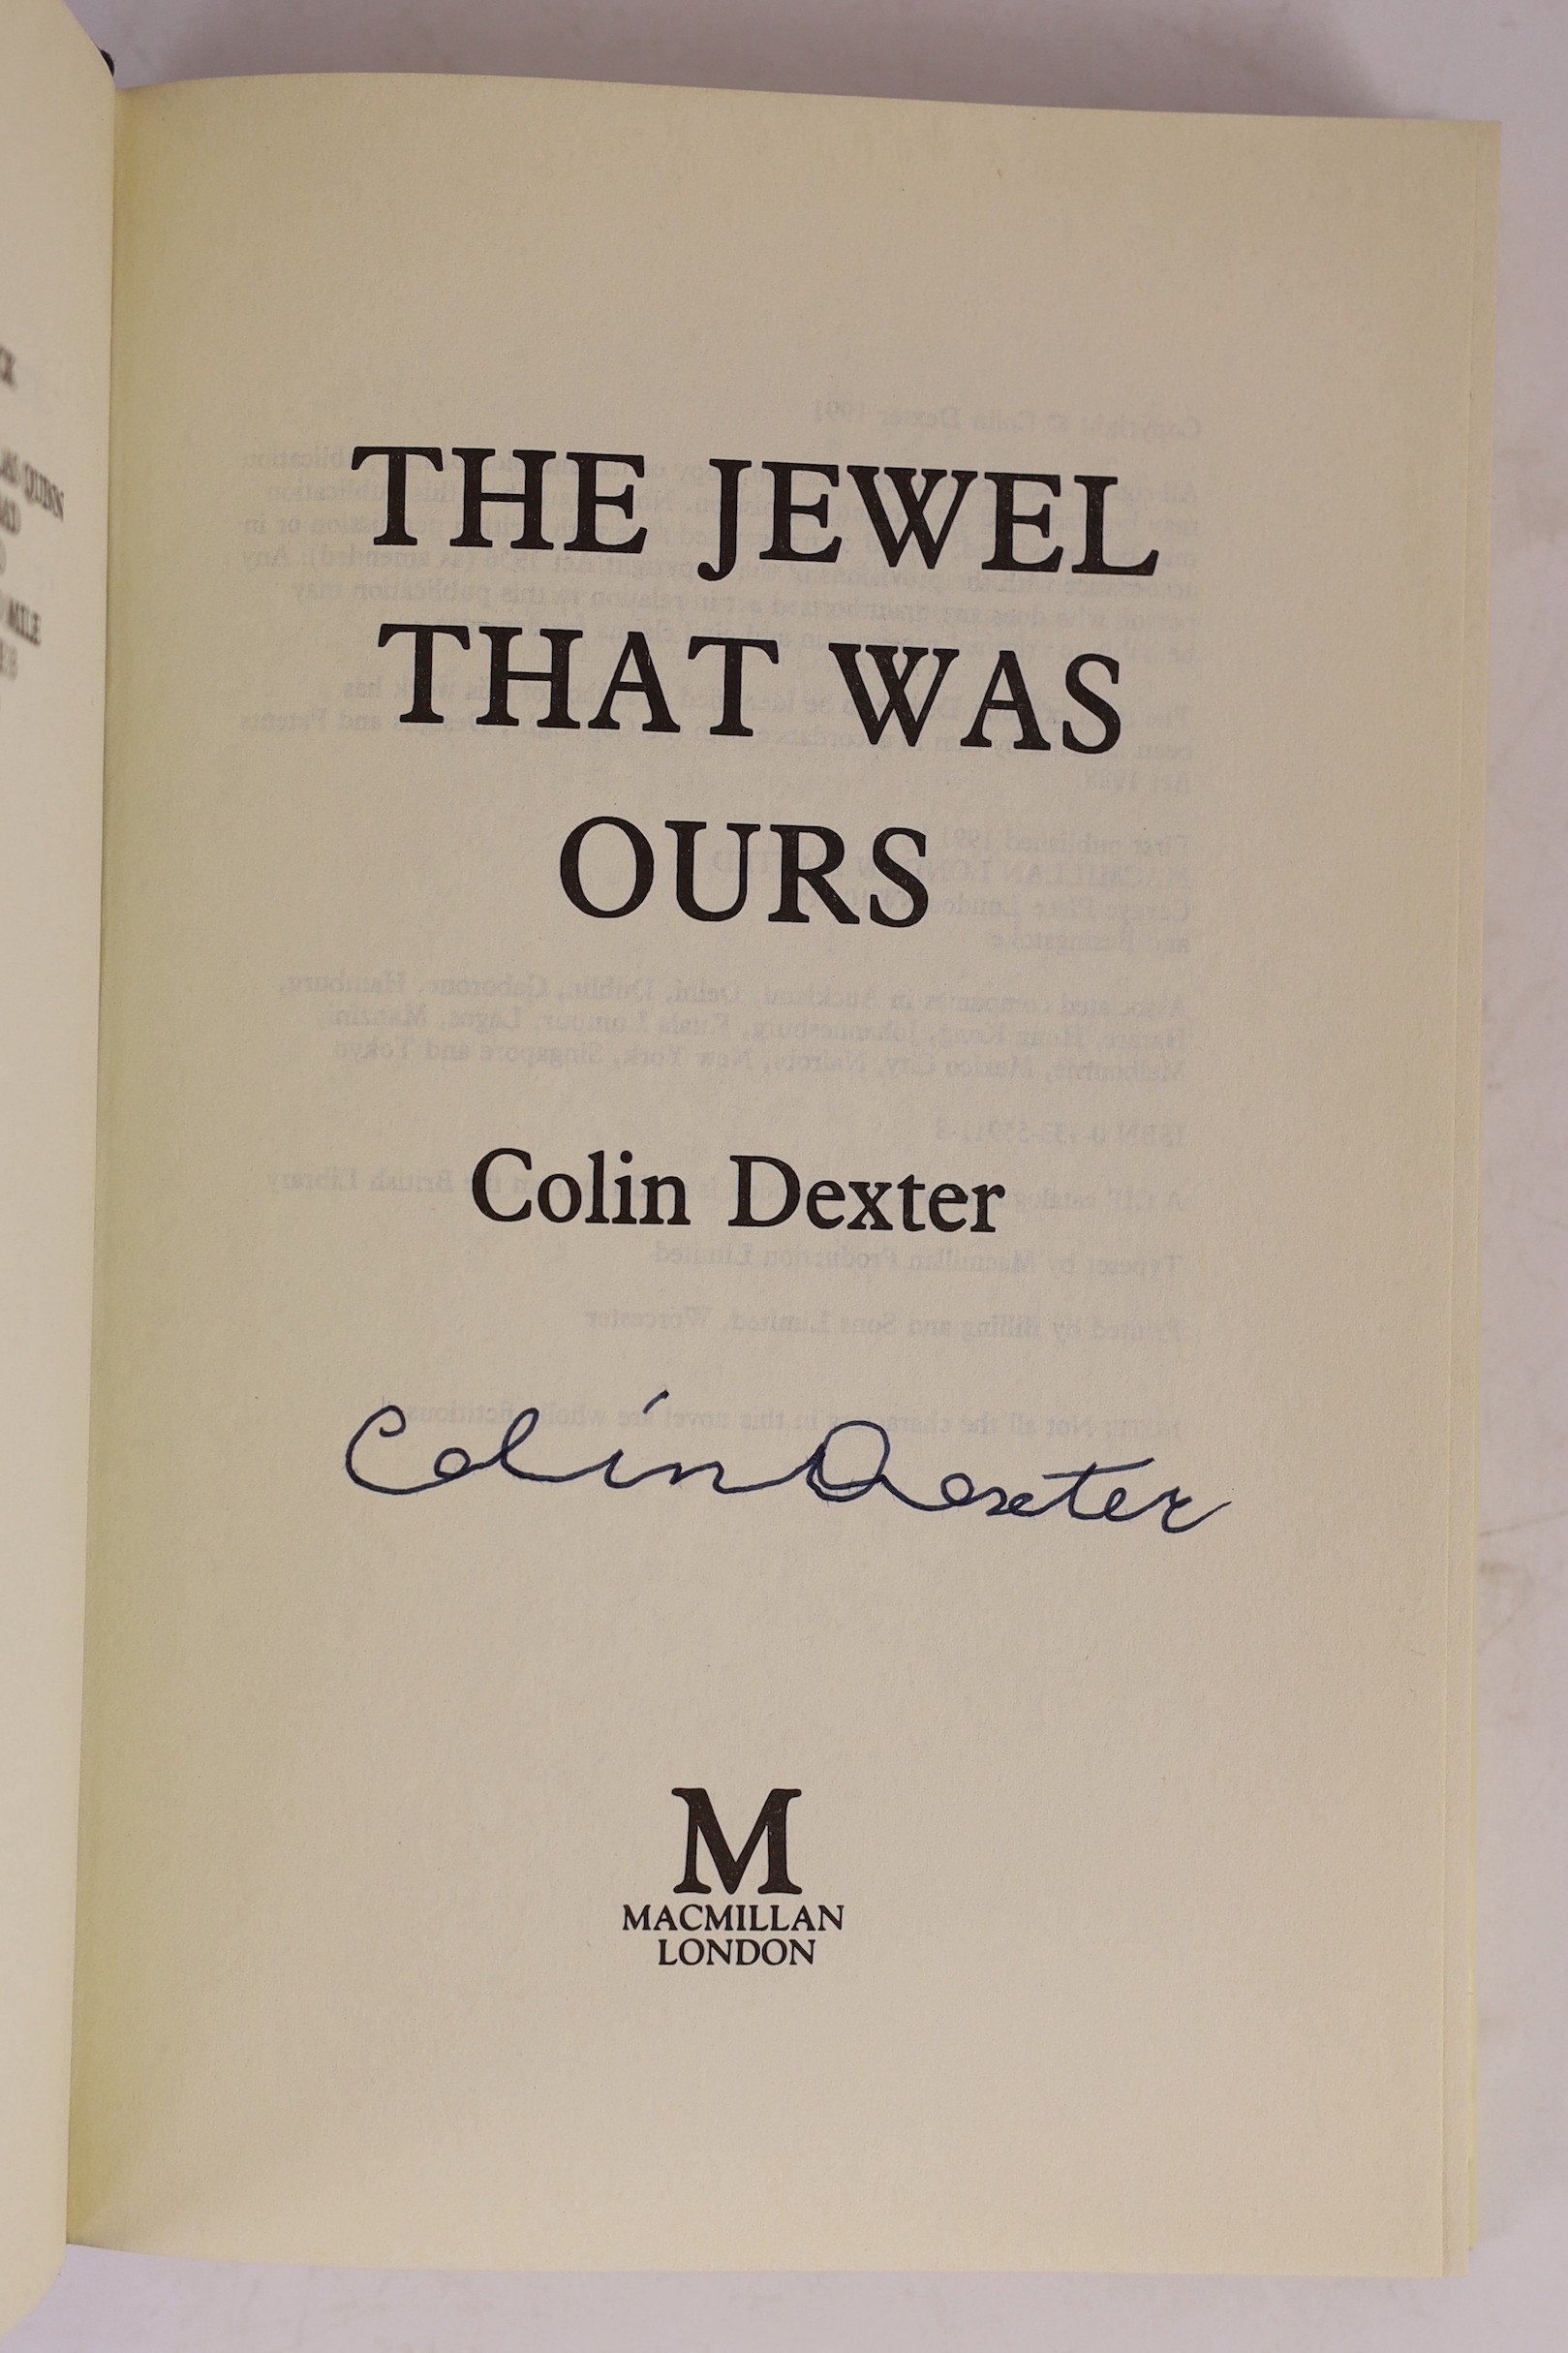 Dexter, Colin - 2 works - The Riddle of the Third Mile, 1st edition, signed on title page by the author, 8vo, original cloth in unclipped d/j, Macmillan, London, 1983 and The Jewel That Was Ours, 1st edition, signed on t